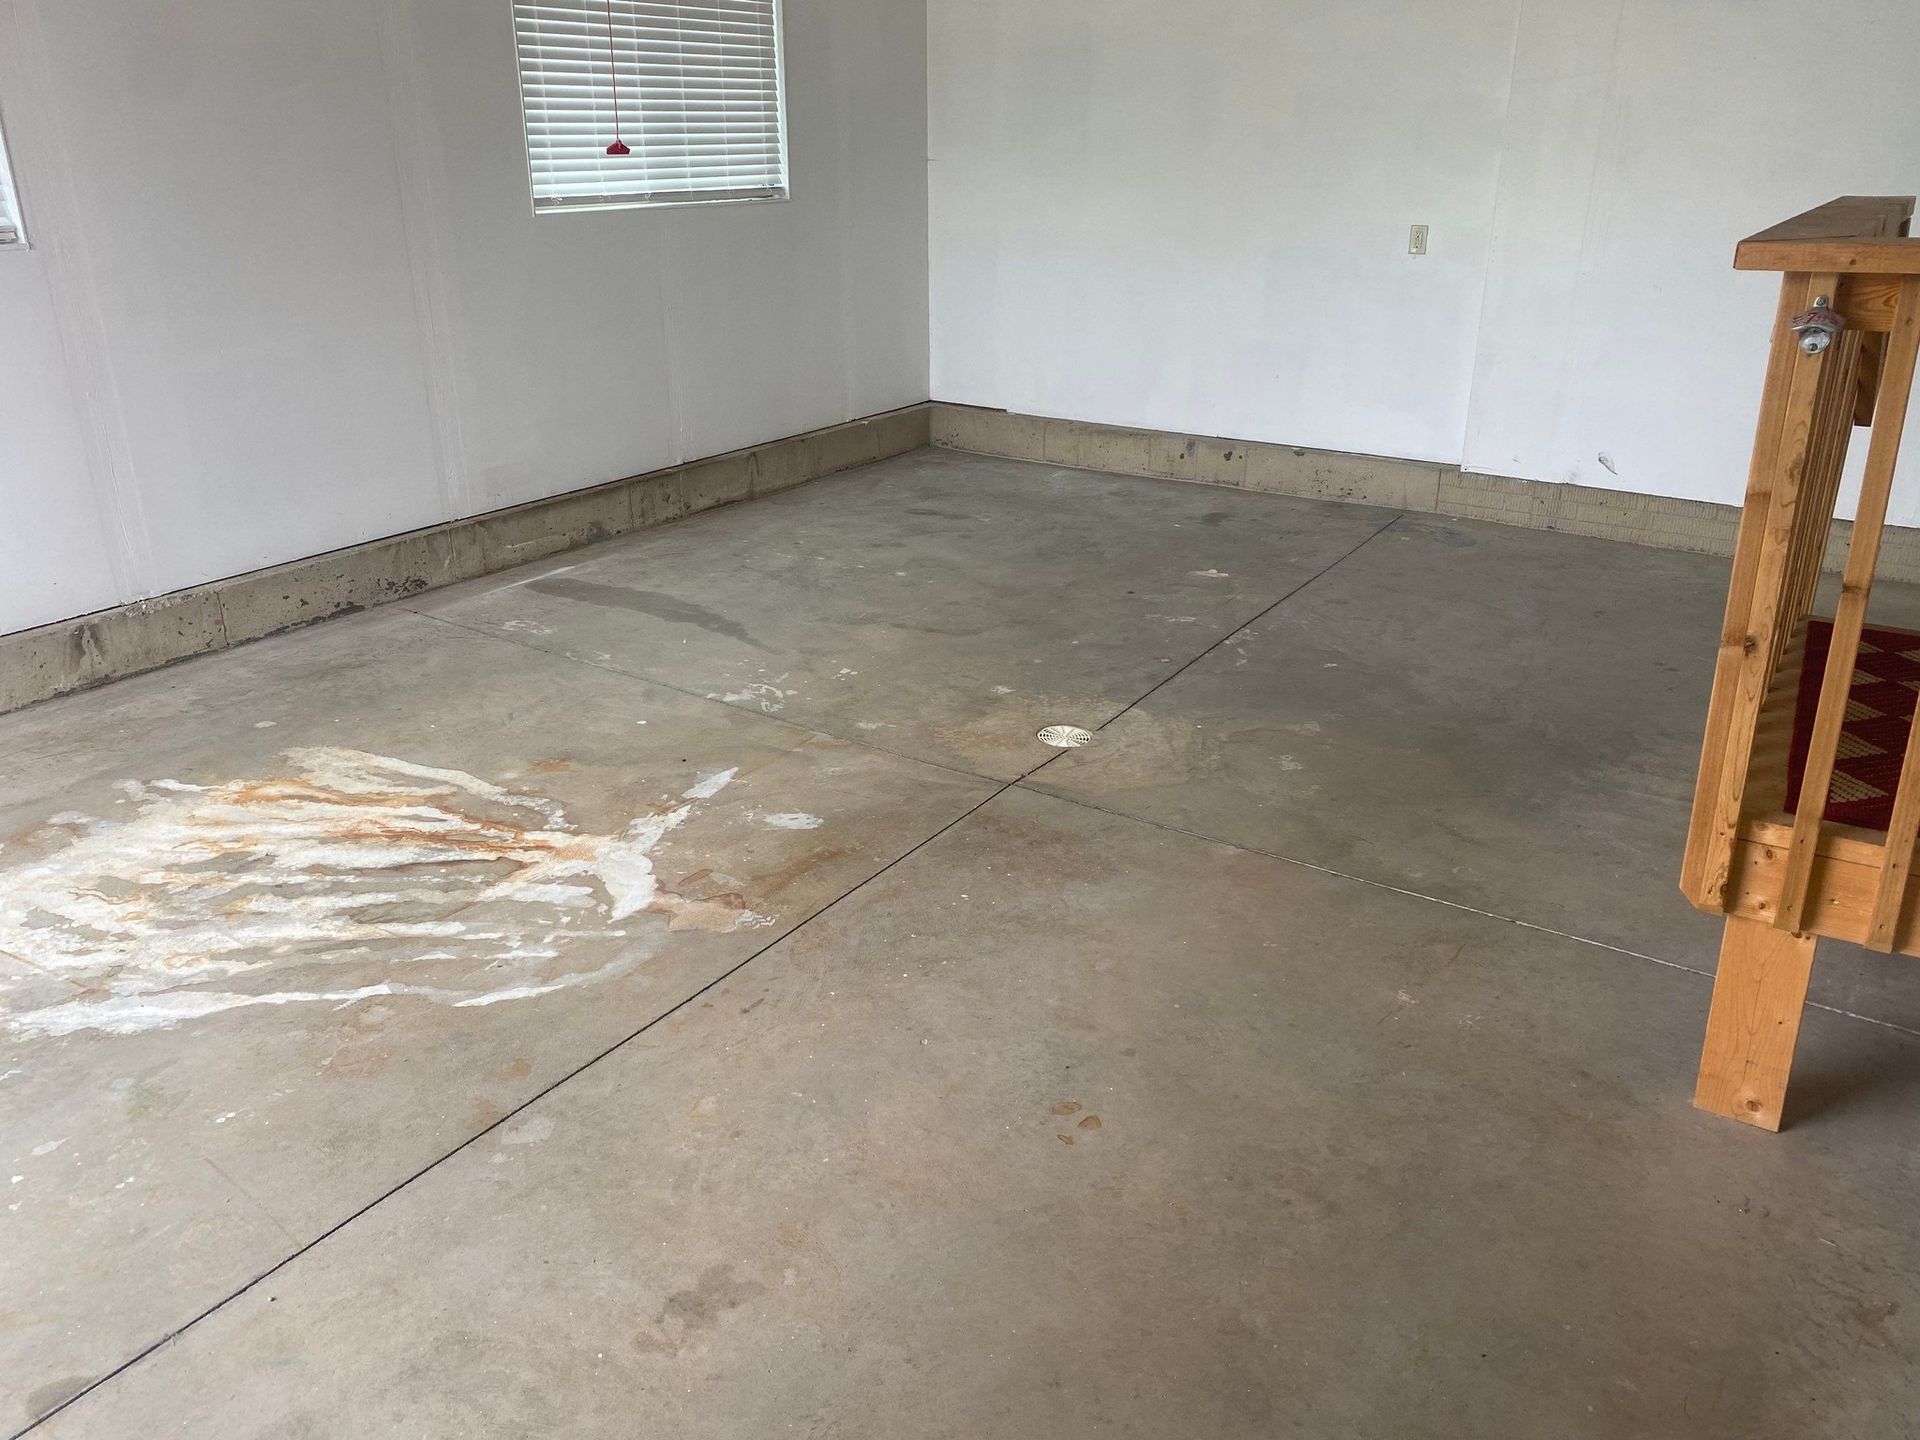 a dirty concrete floor in a garage next to a wooden railing